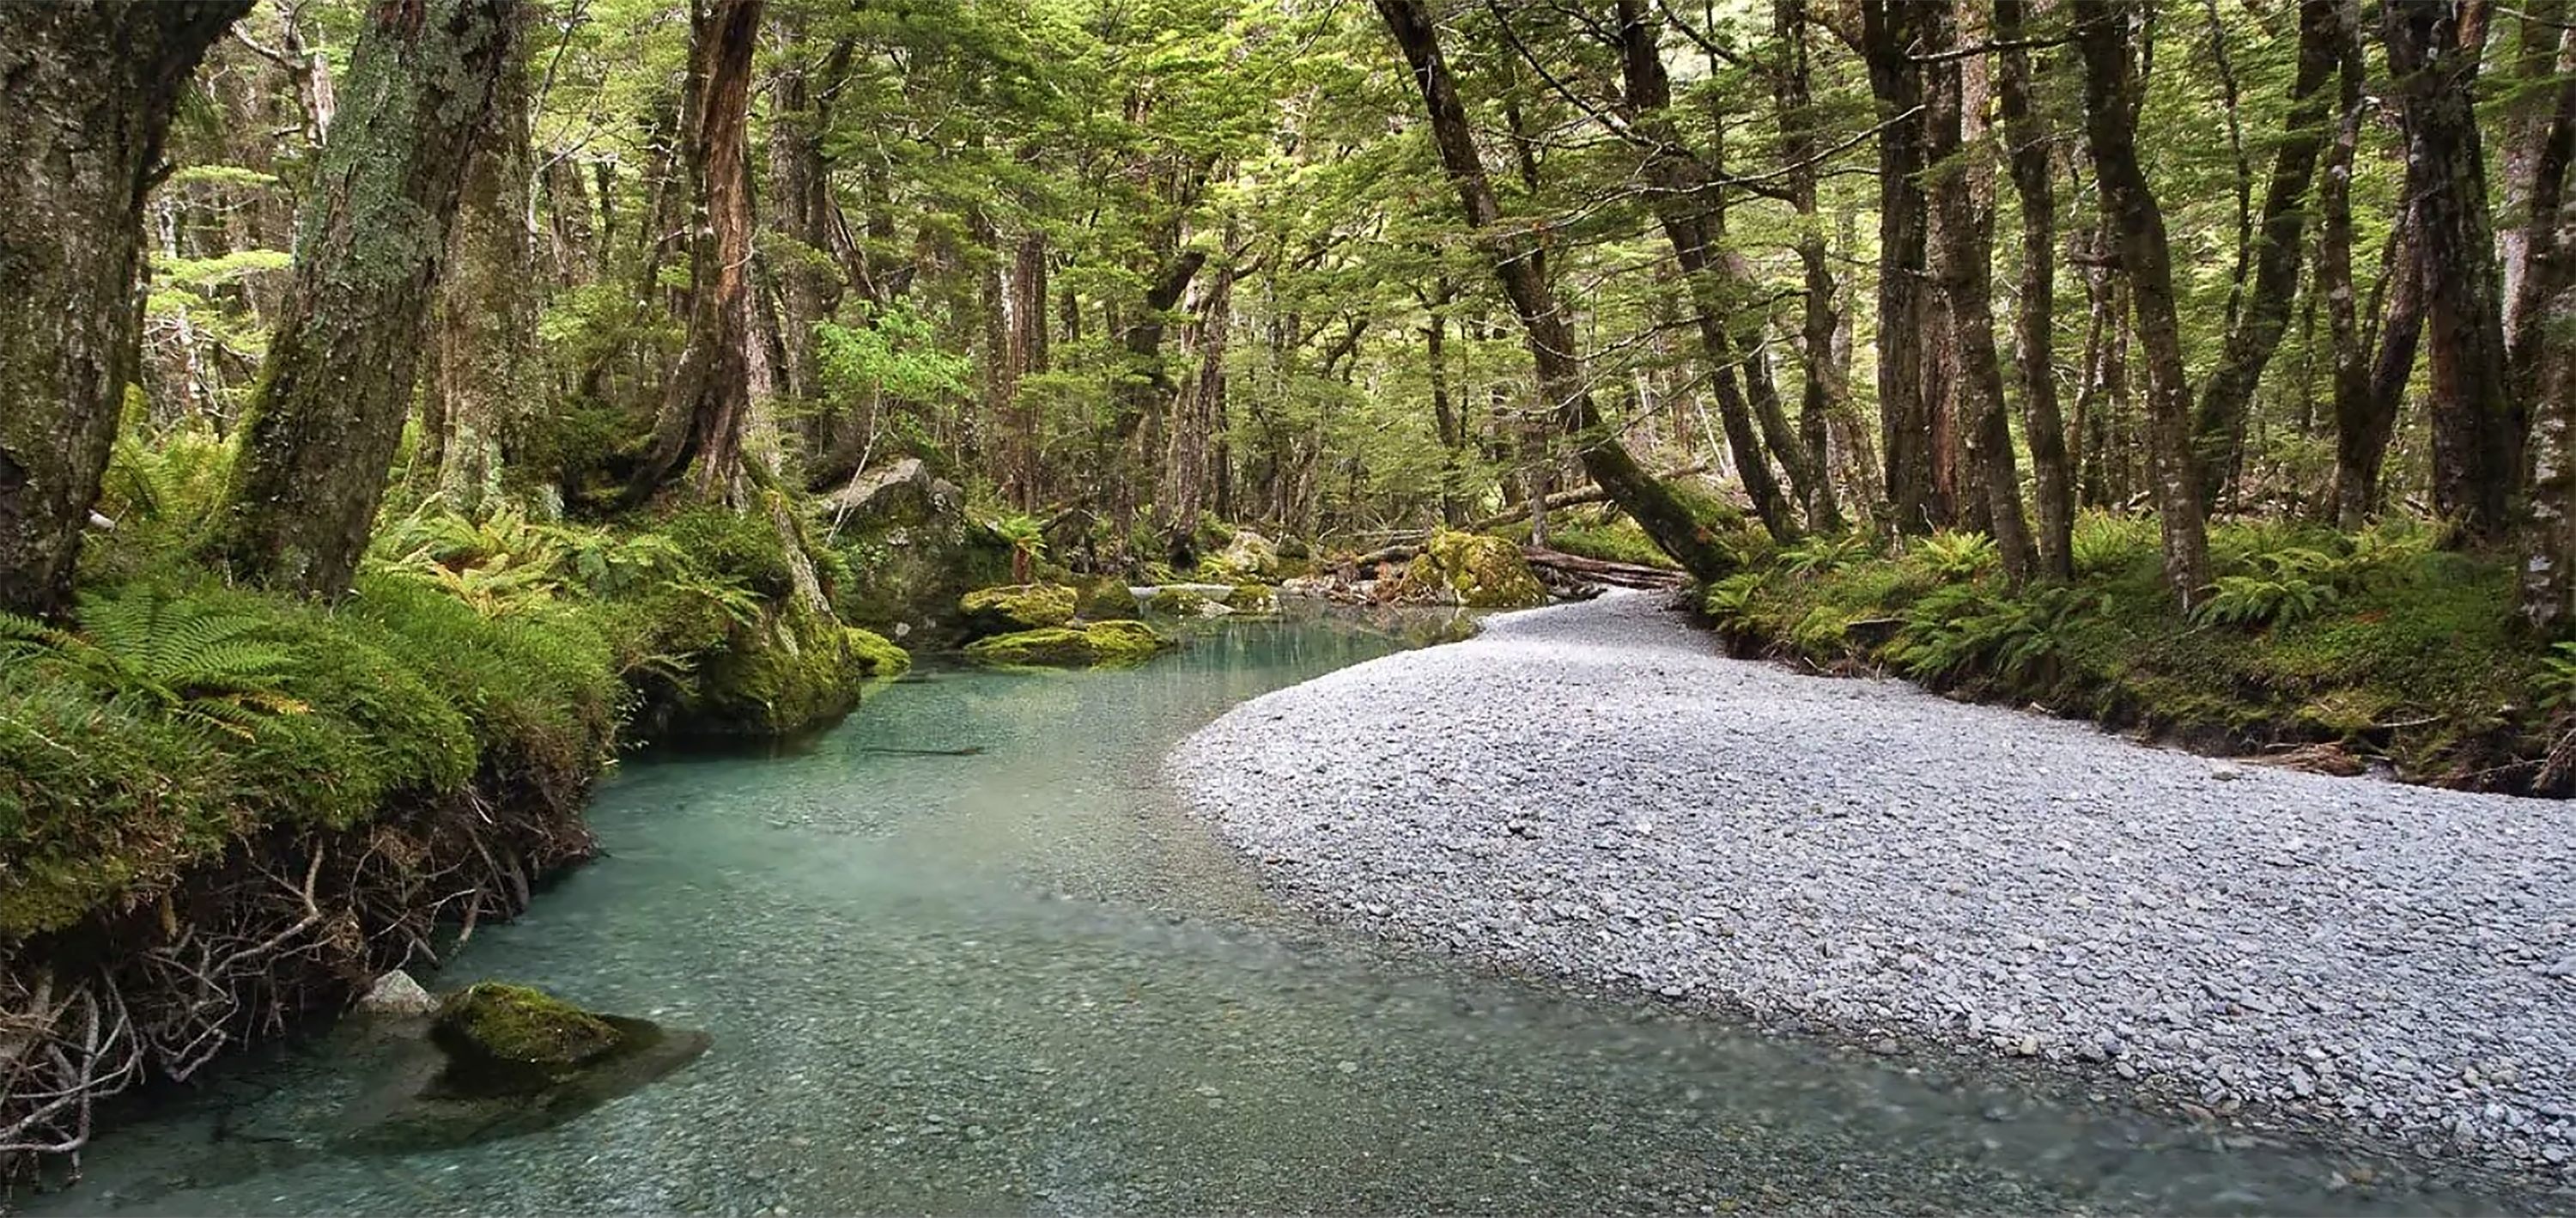 A Quiet Stream, Routeburn Track - New Zealand